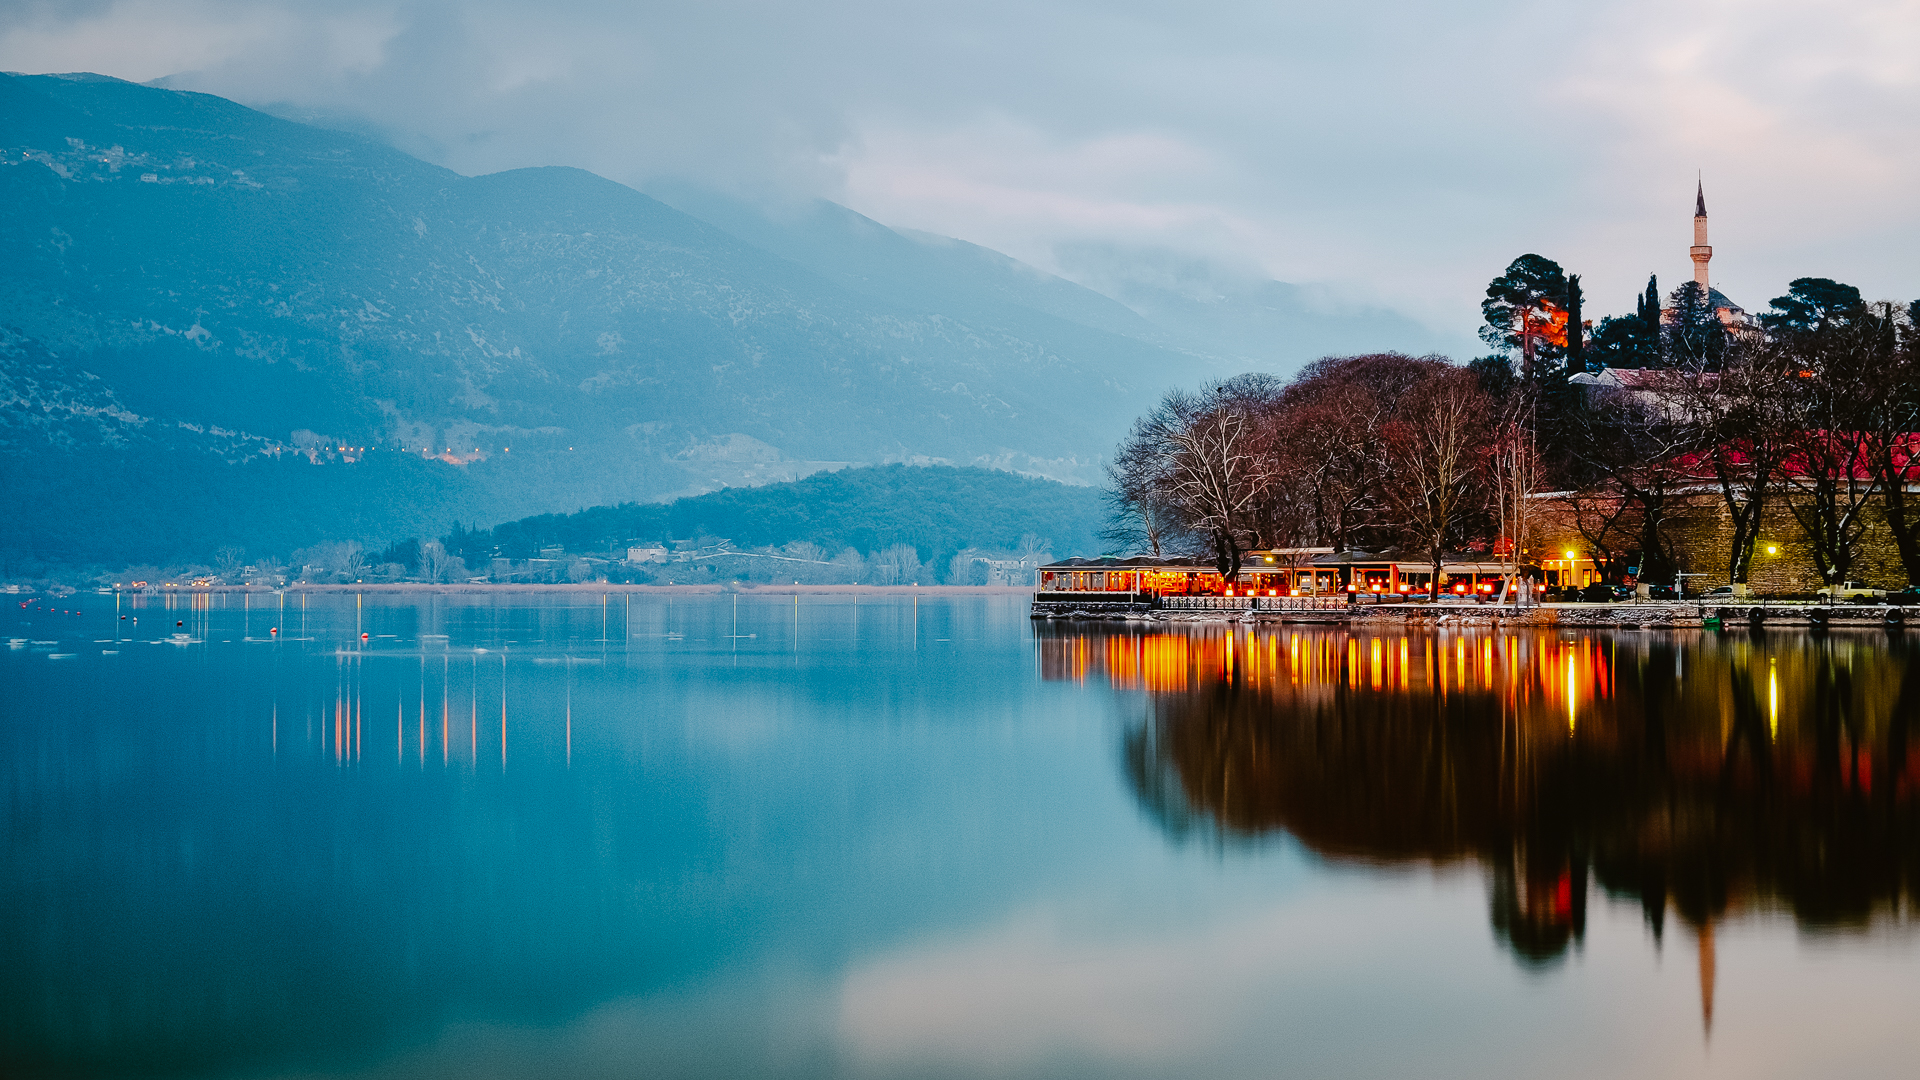 Pamvotida Lake in the evening hours with mountains reflecting in the water in the background and to the right a well-lit peninsula with buildings and the Fethiye Mosque standing out.